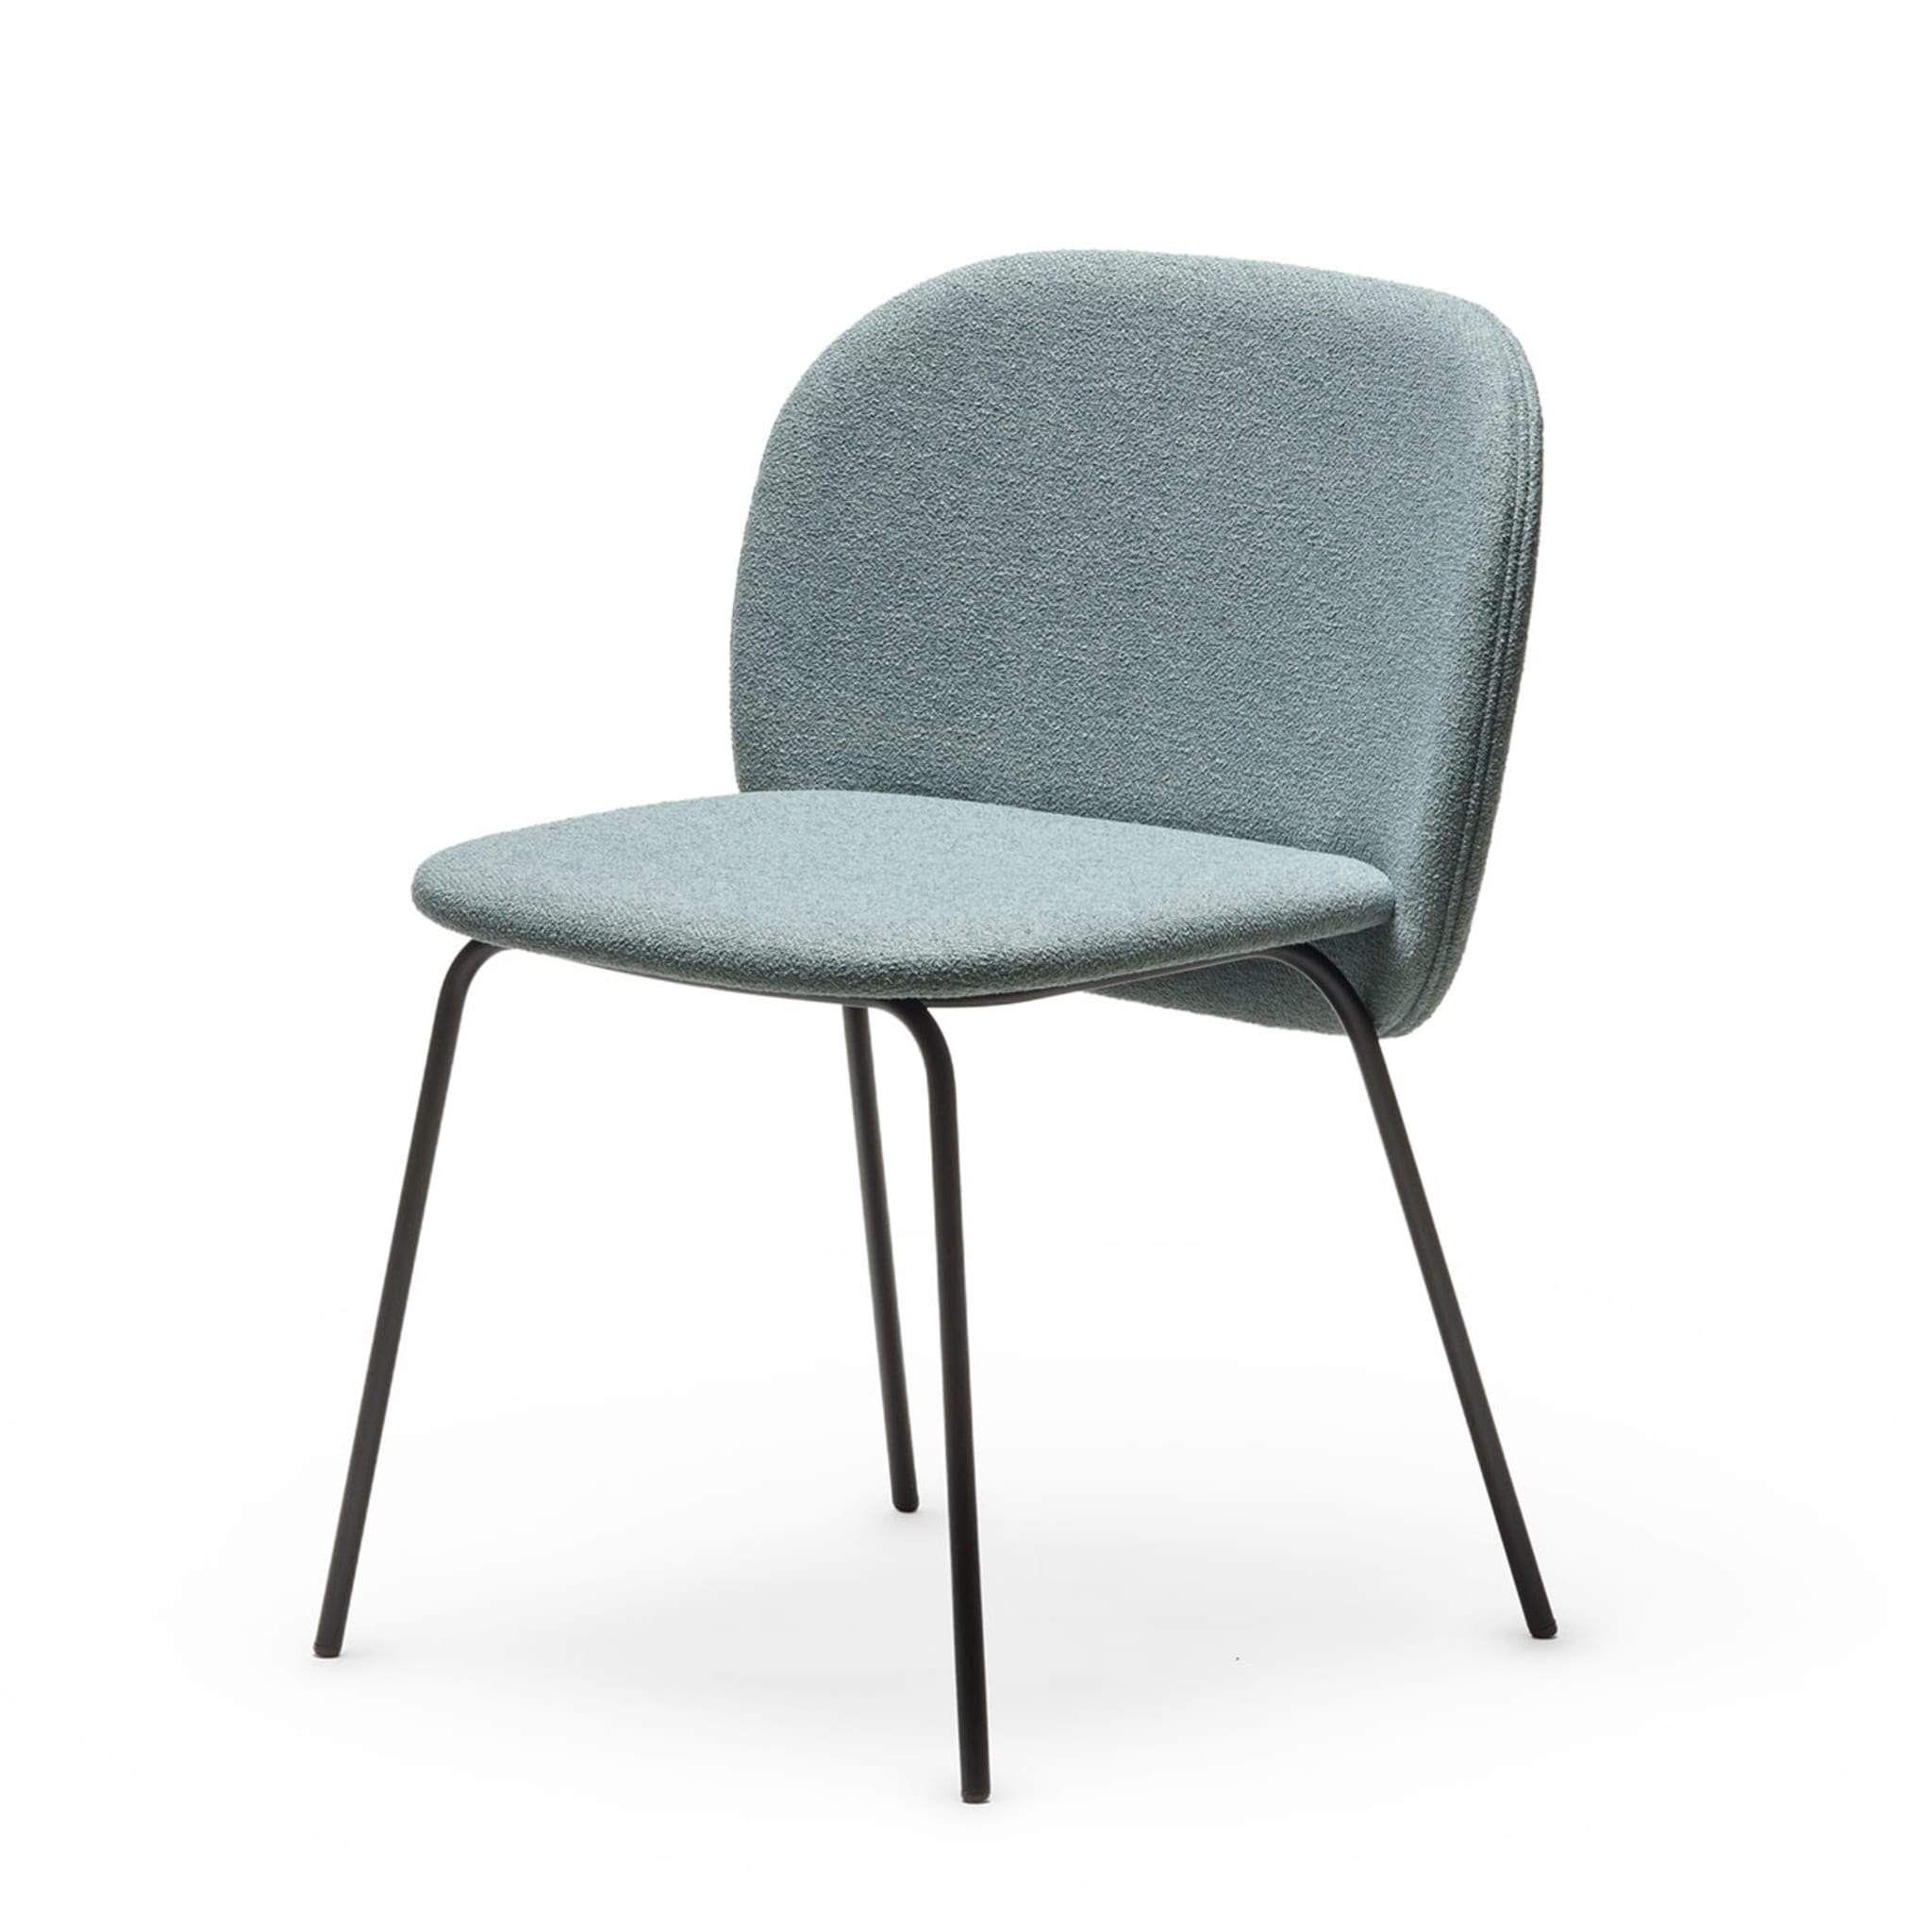 Chips M Light Blue Chair By Studio Pastina - Alternative view 1